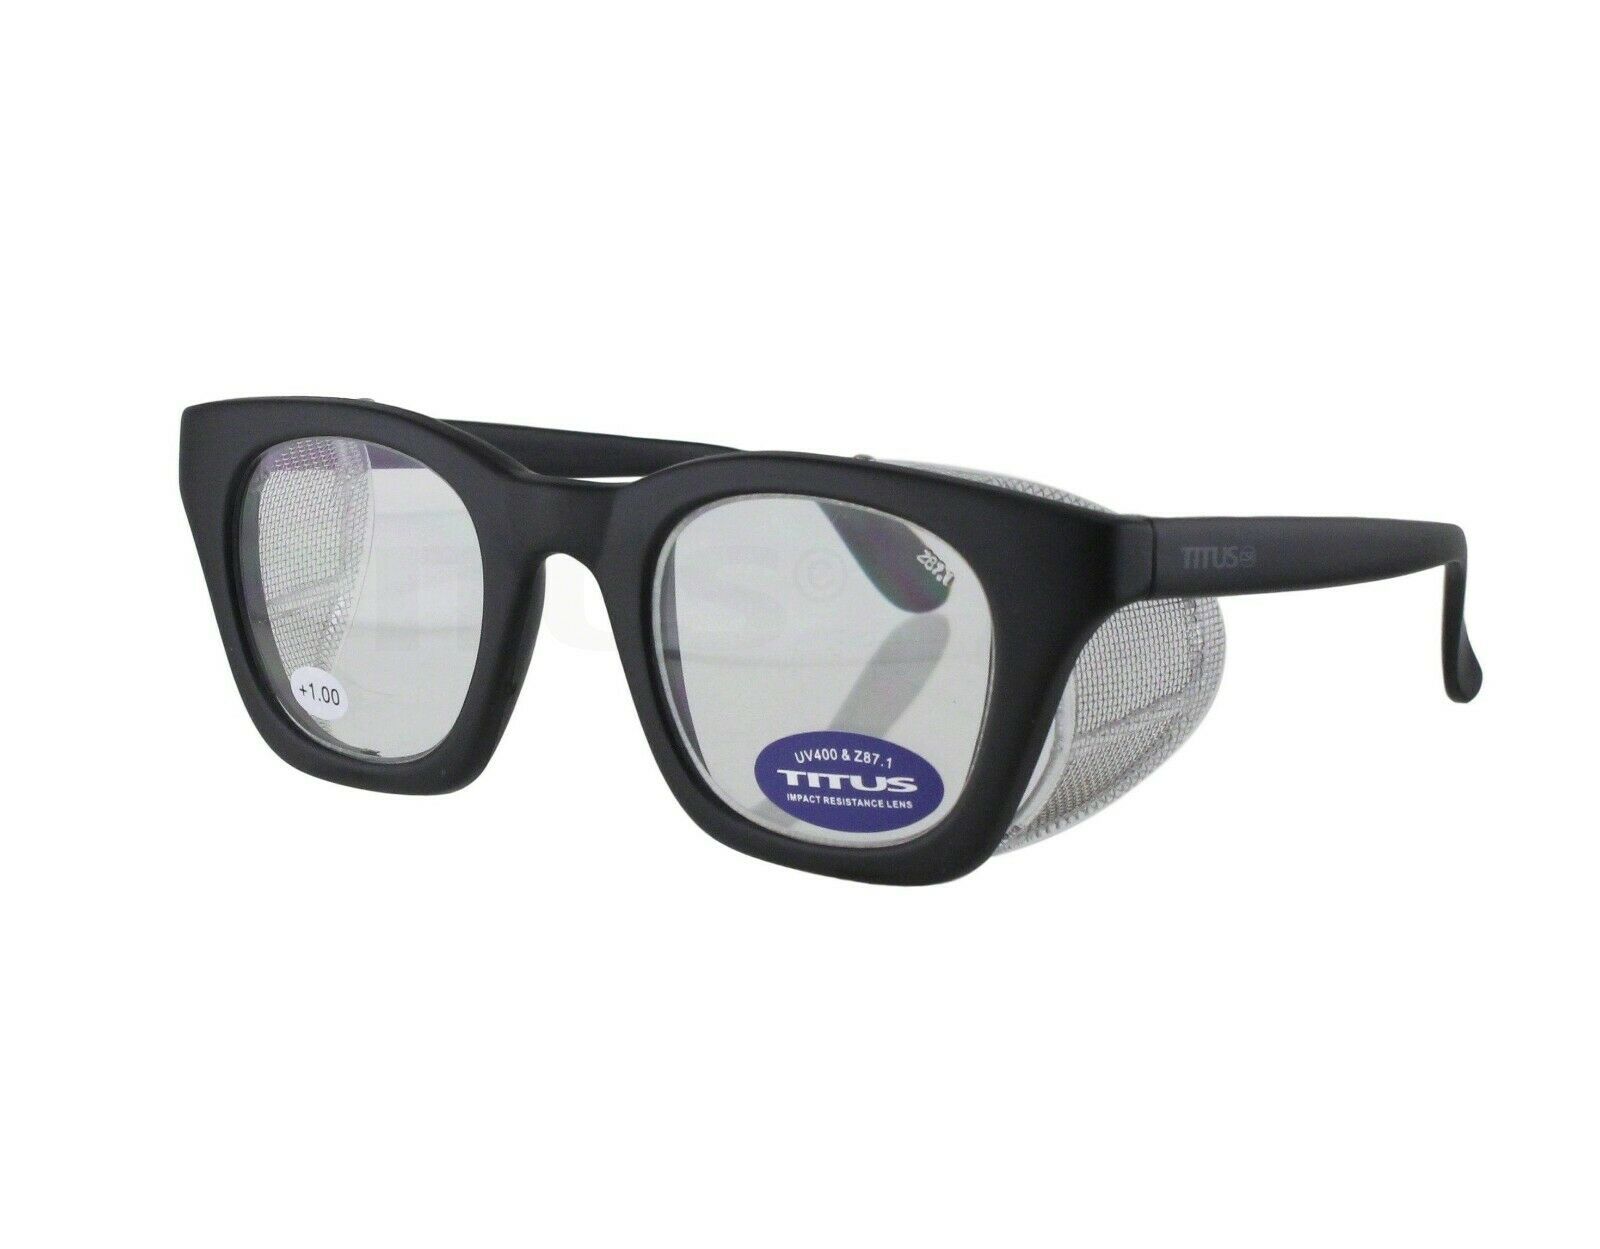 Titus G12 Retro Safety Readers Glasses Magnification W Side Shields Ansi Z87